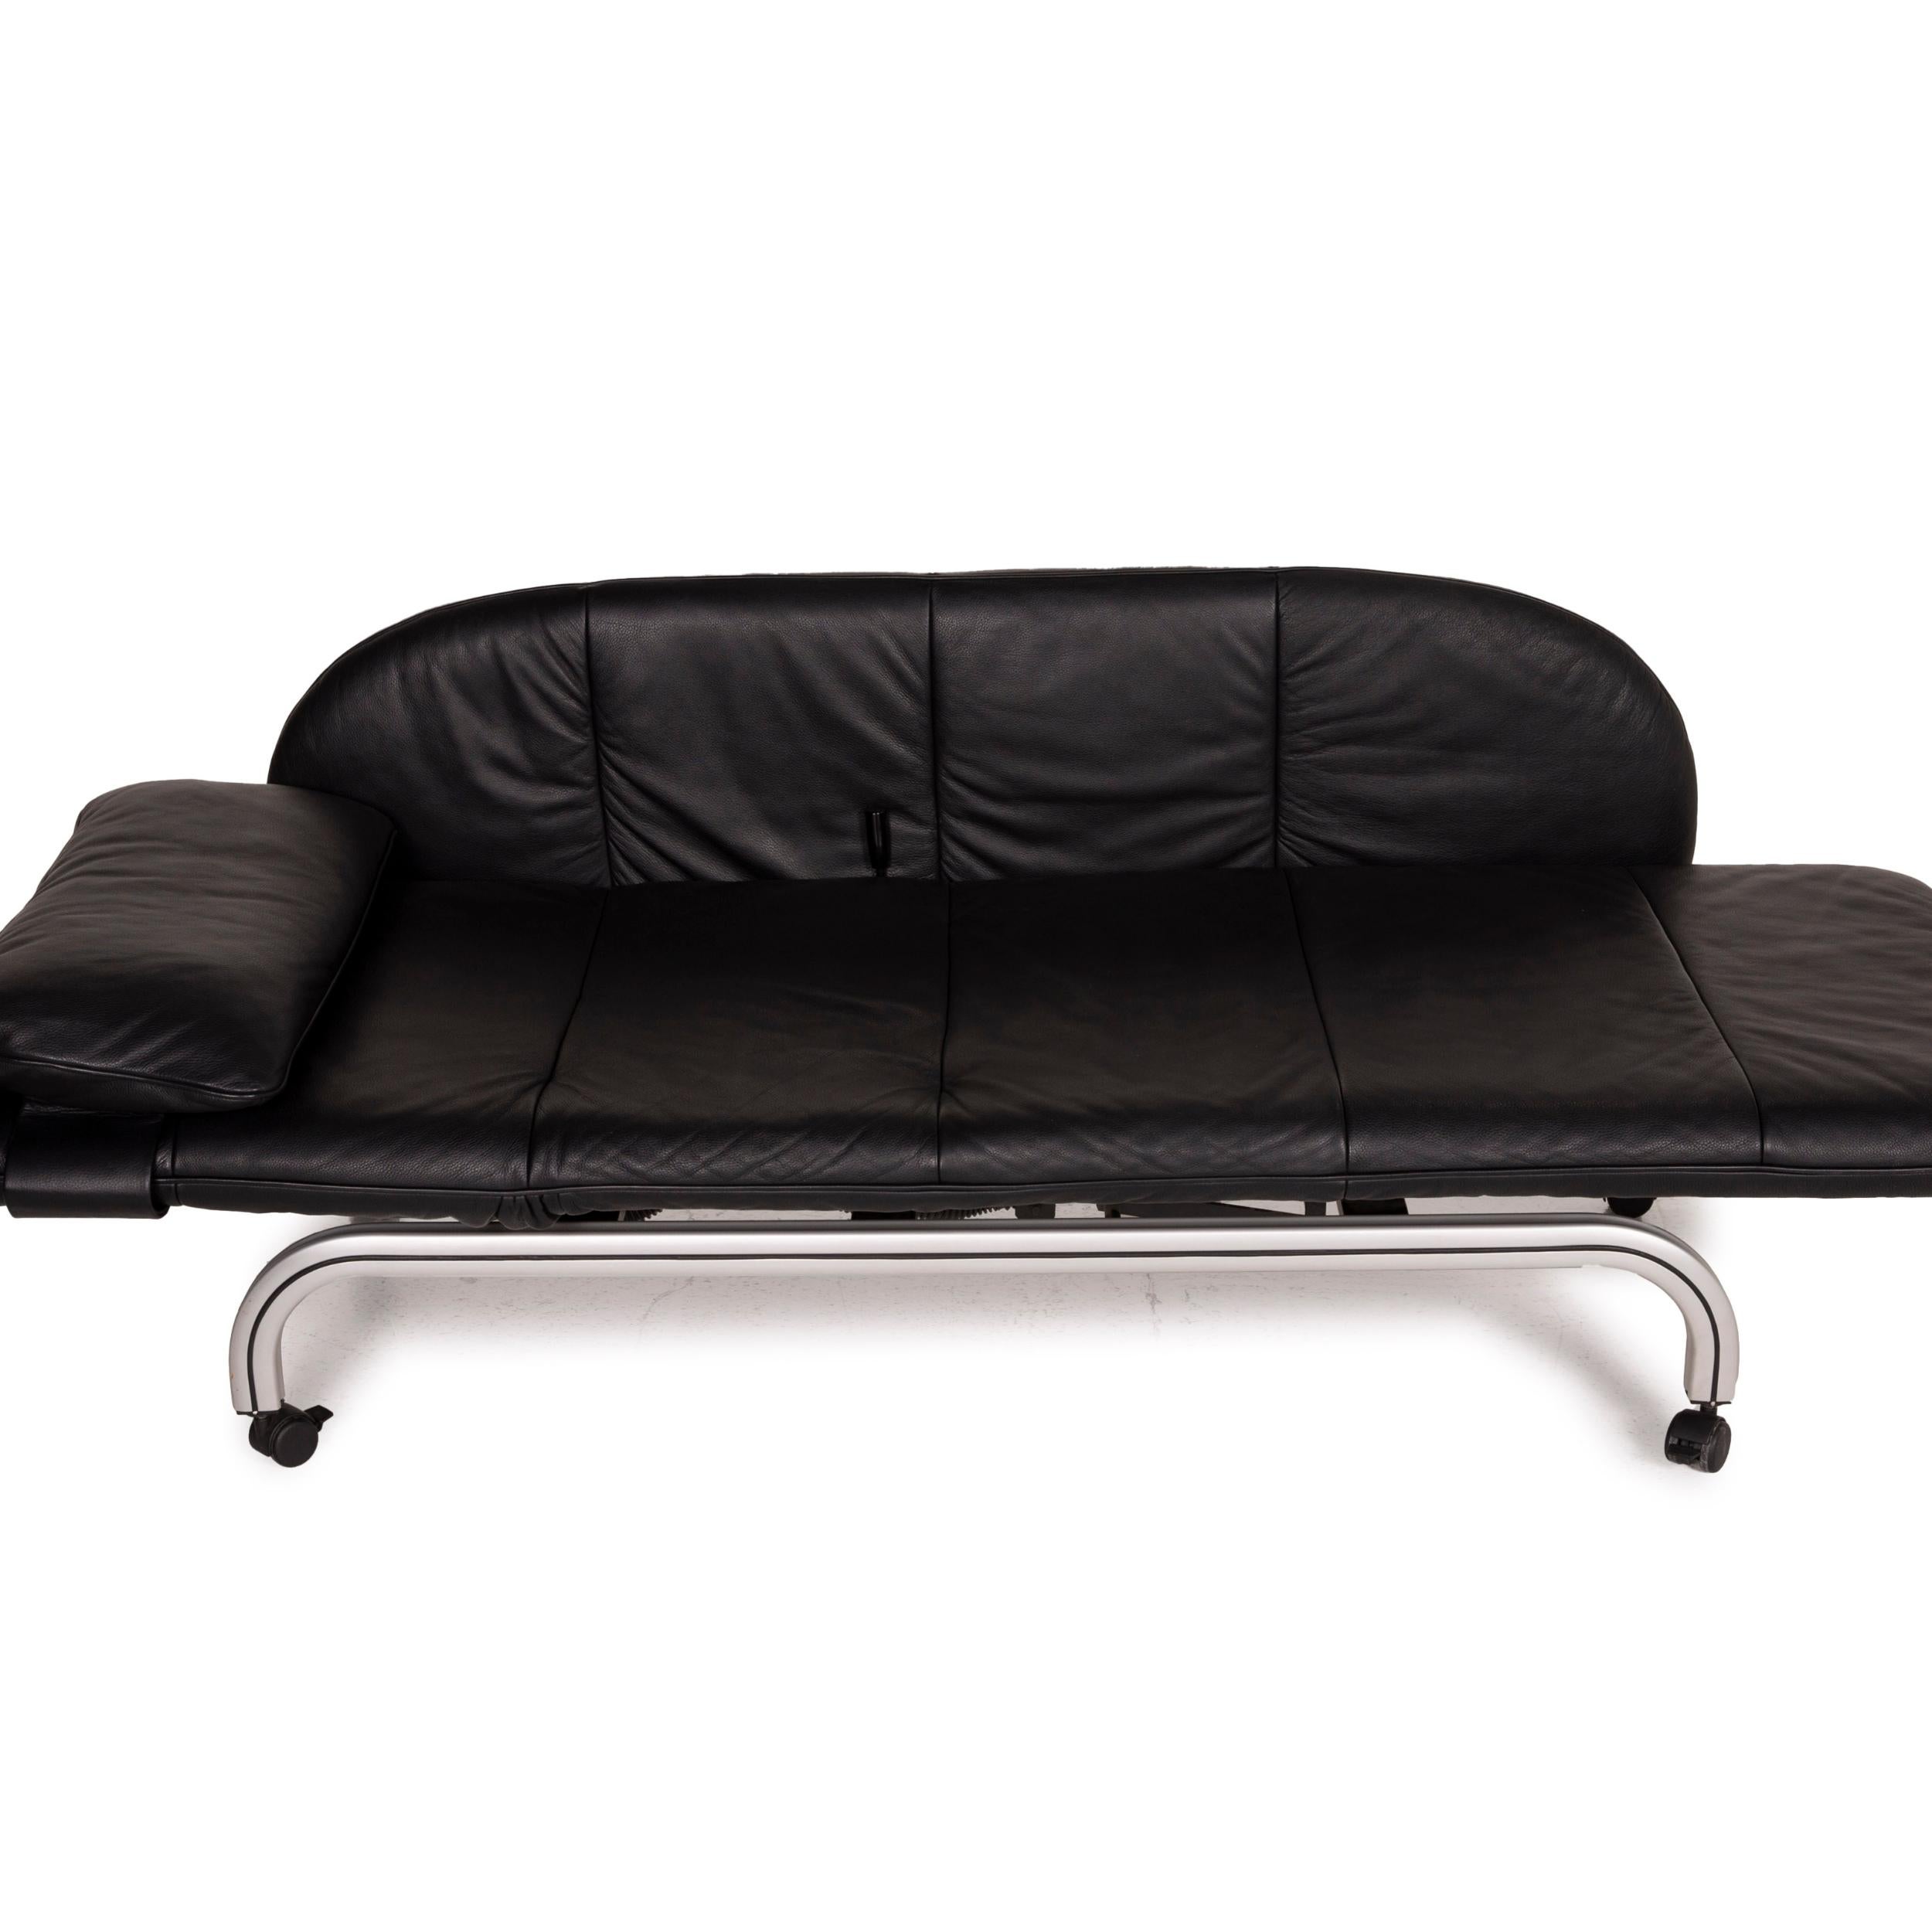 Interprofil Beo Leather Lounger Black Function Two-Seater 2